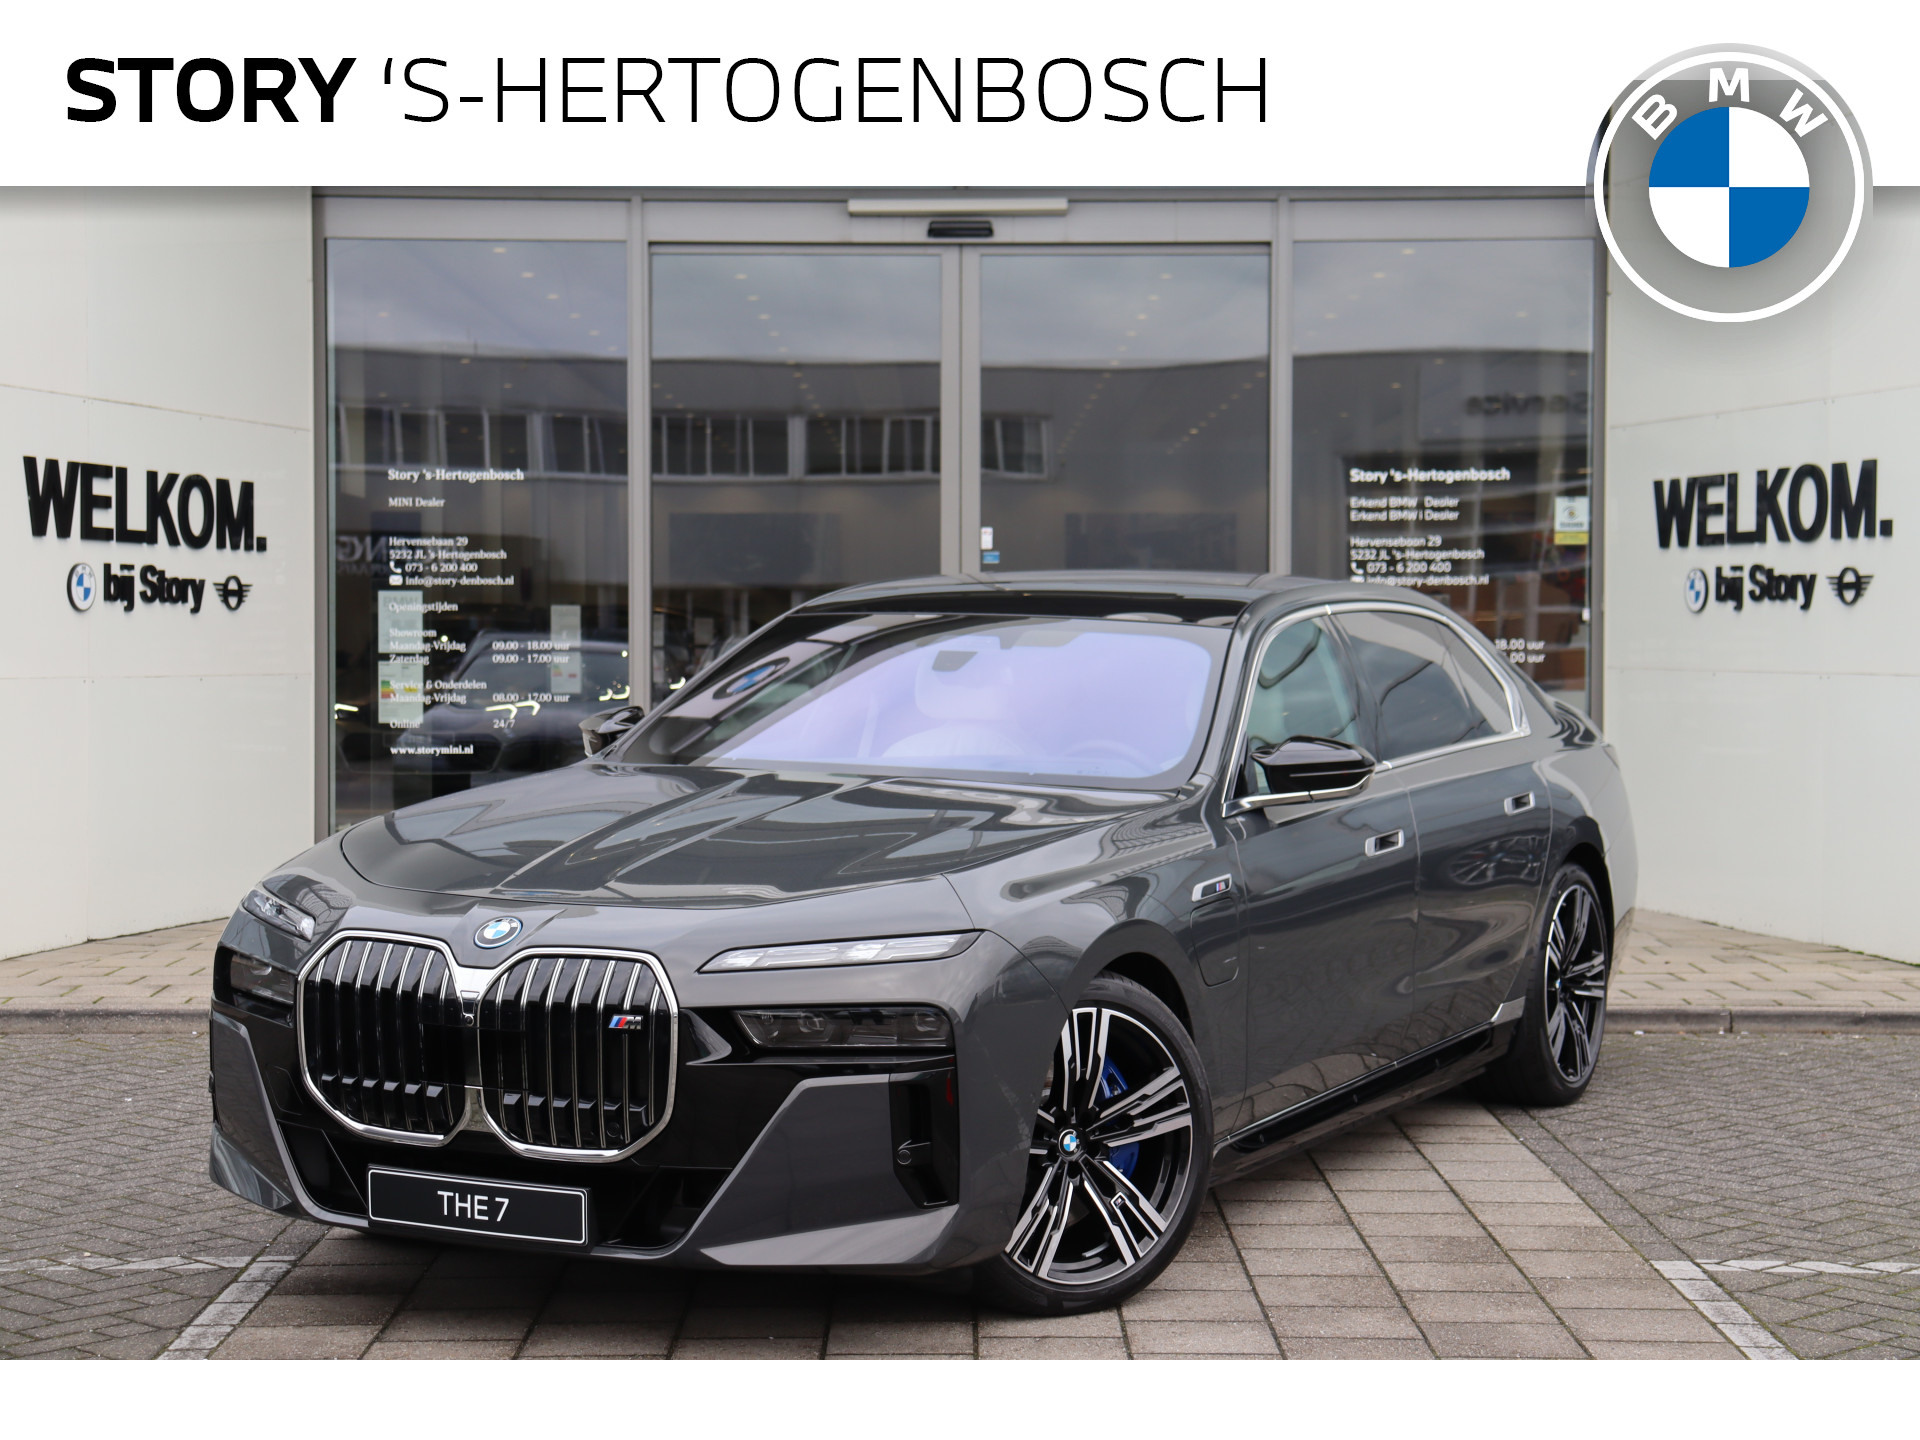 BMW 7 Serie M760e xDrive High Executive Automaat / Panoramadak Sky Lounge / Massagefunctie  voor + achter / Parking Assistant Professional / Bowers & Wilkins / Active Steering